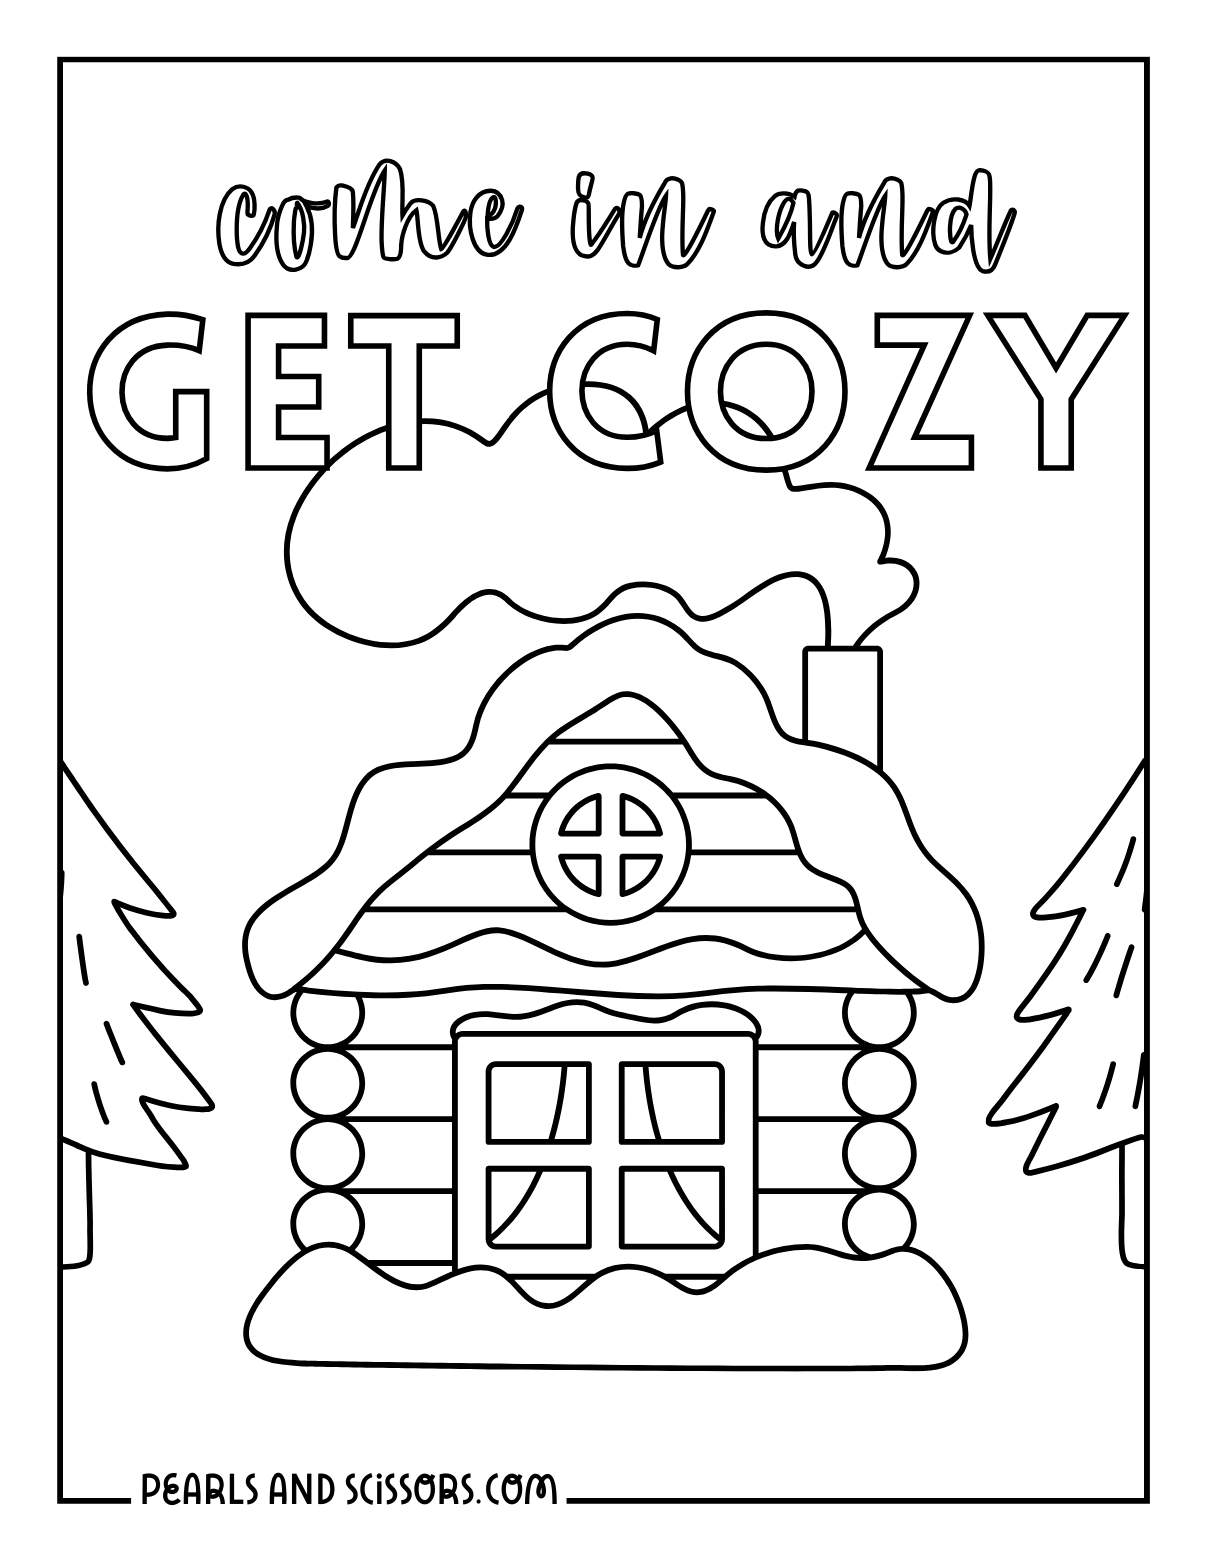 A log cabin with snow during winter coloring page.